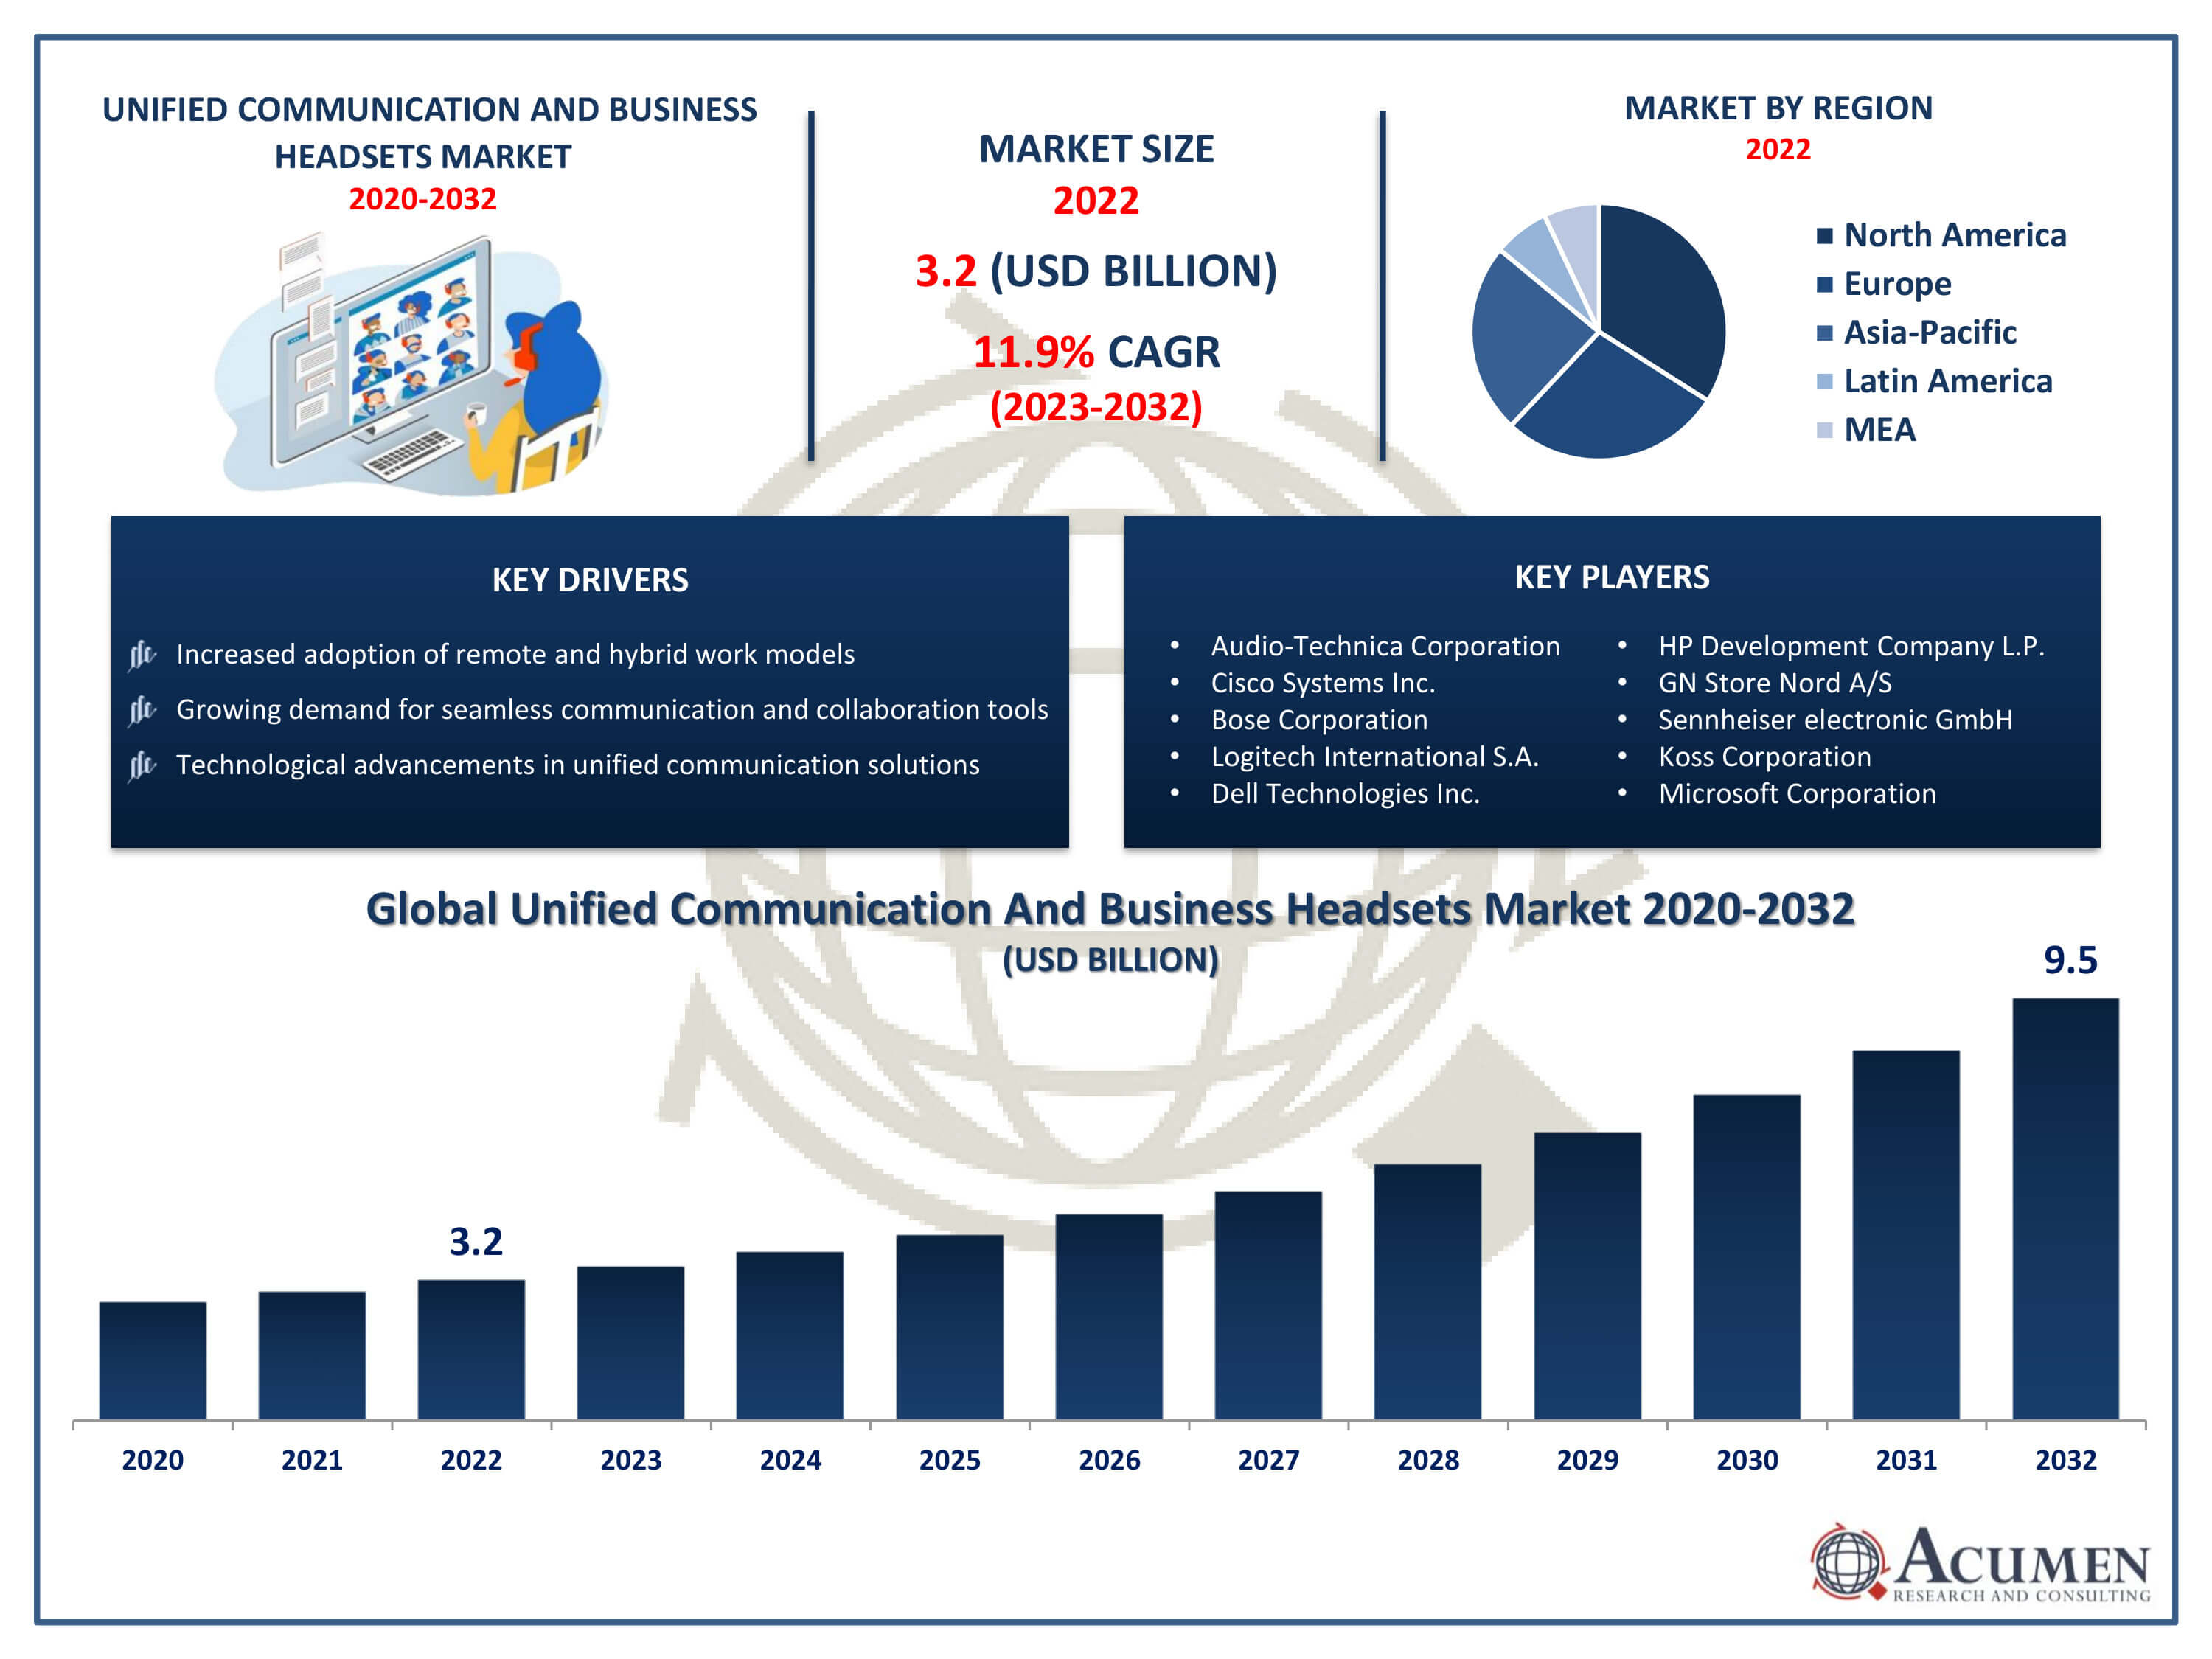 Unified Communication and Business Headsets Market Trends